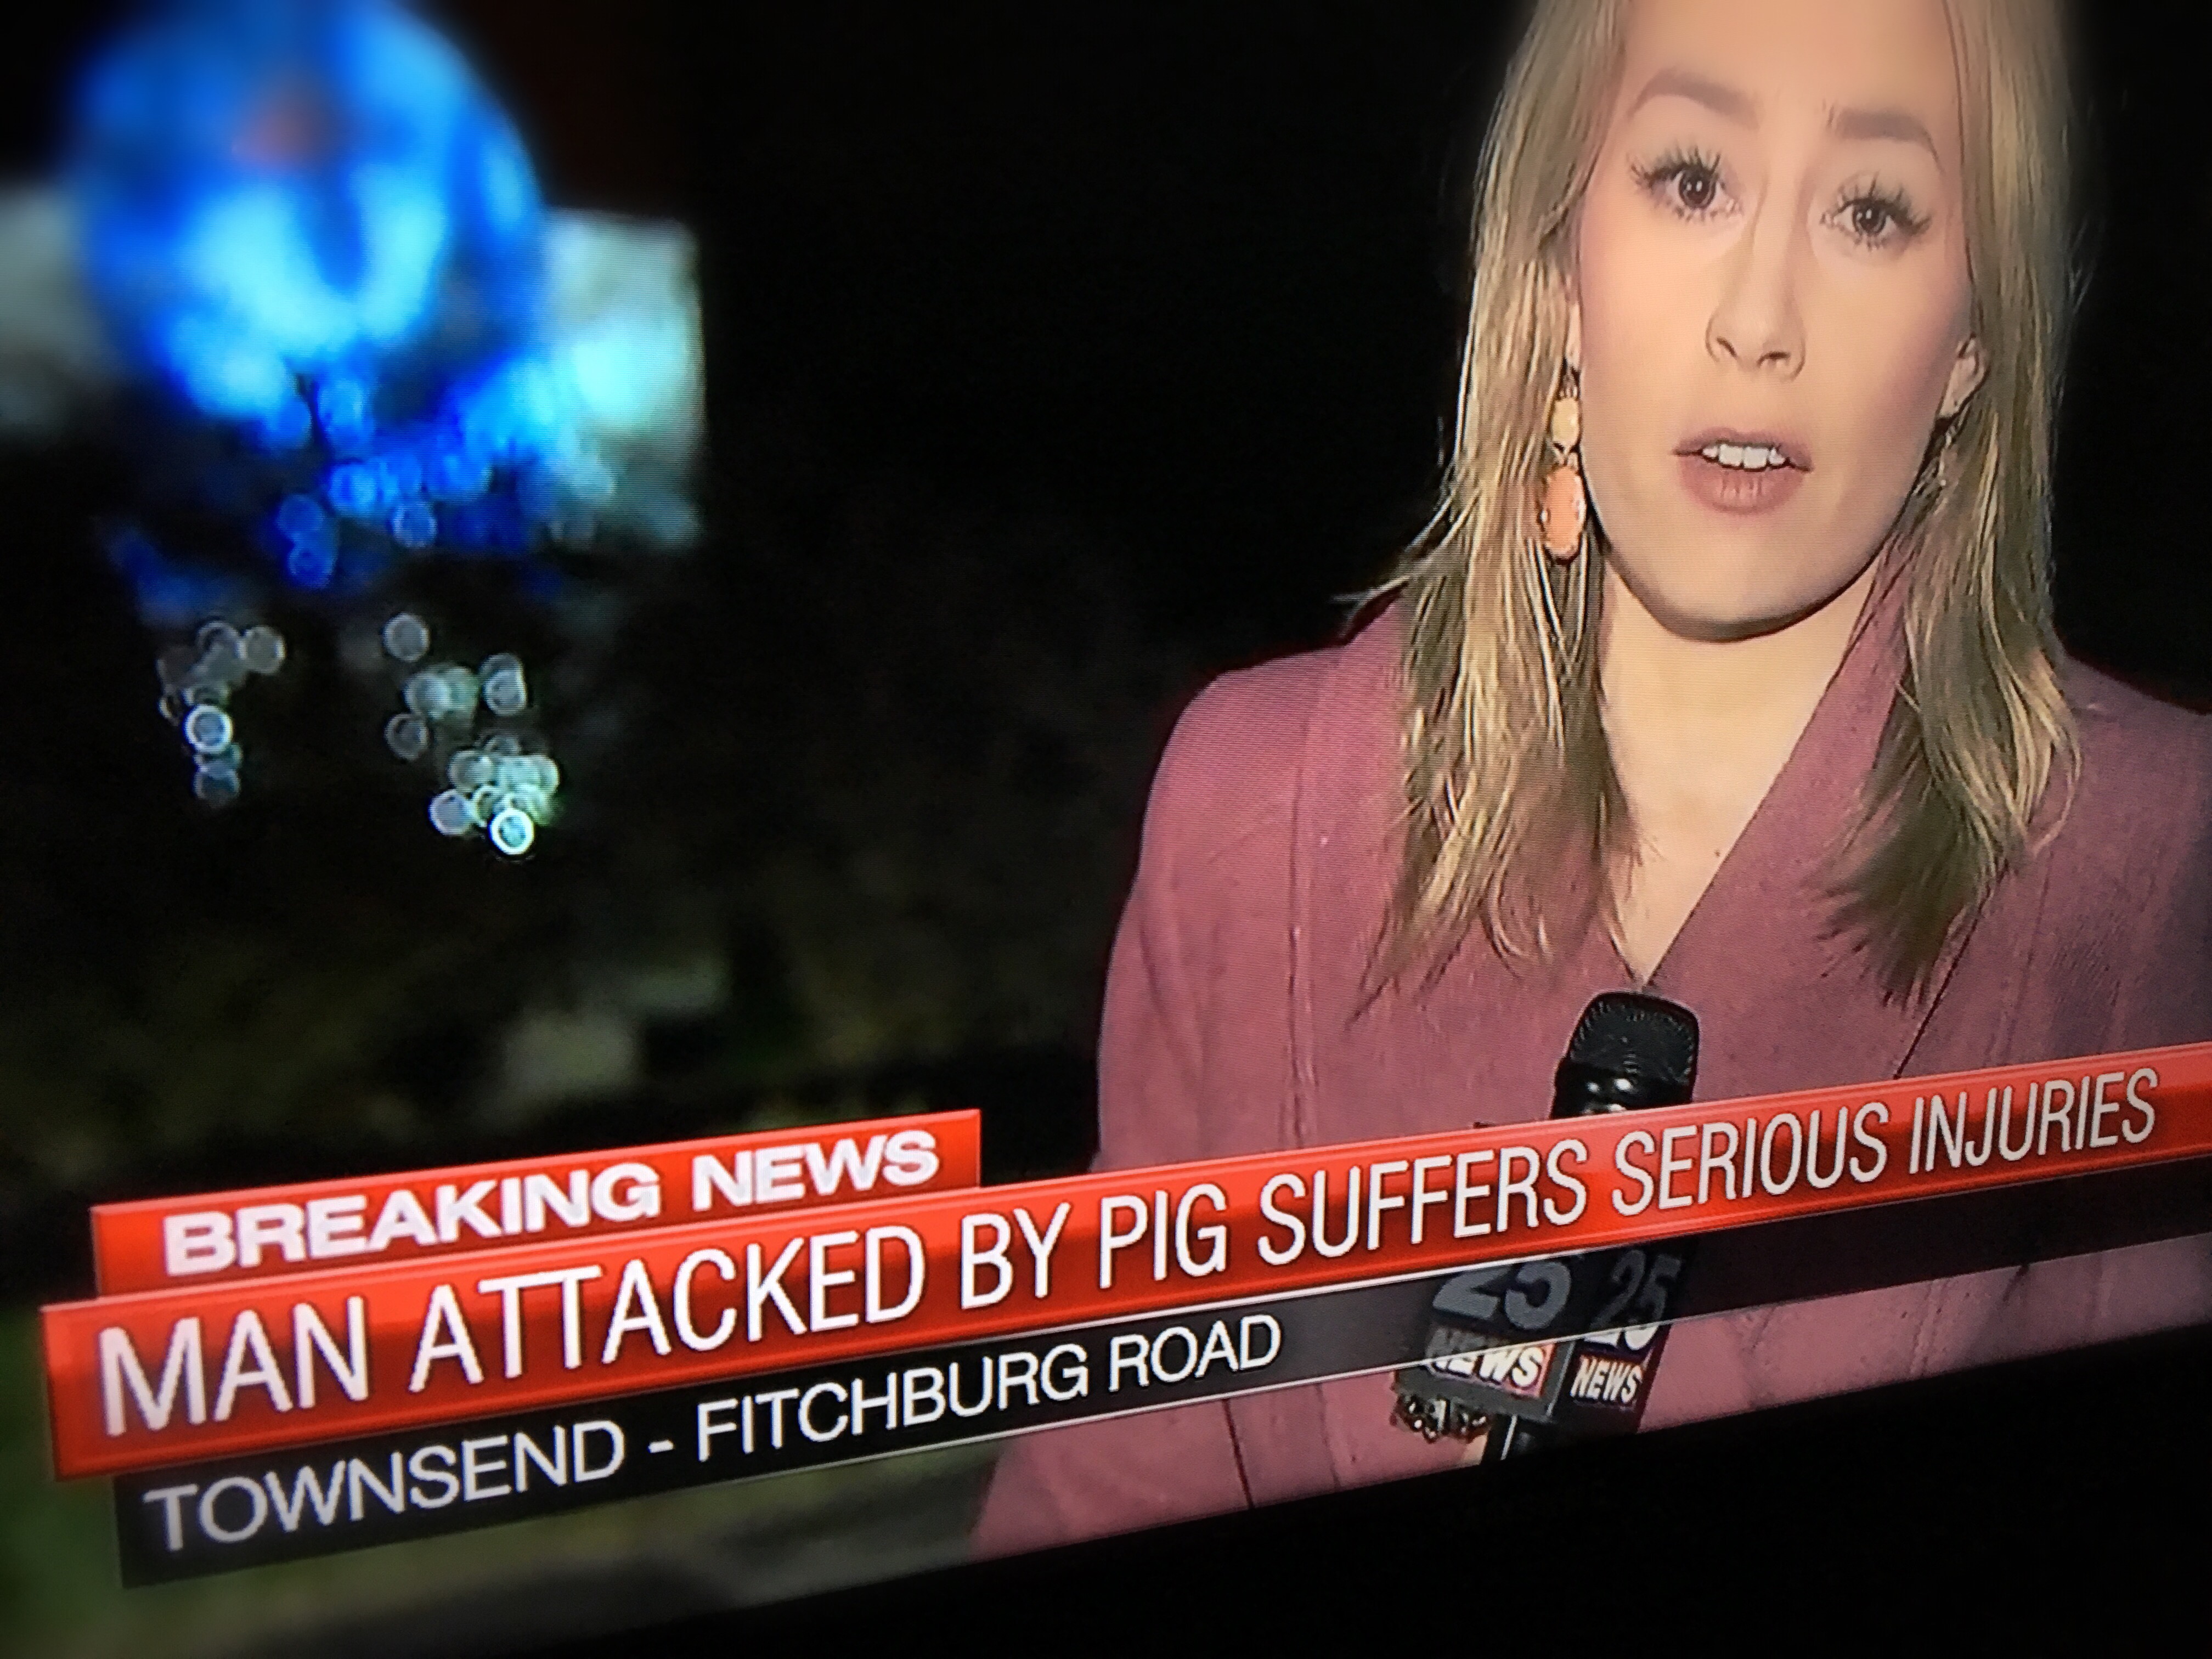 Local news in Boston covering a pig attack many miles outside of the city.